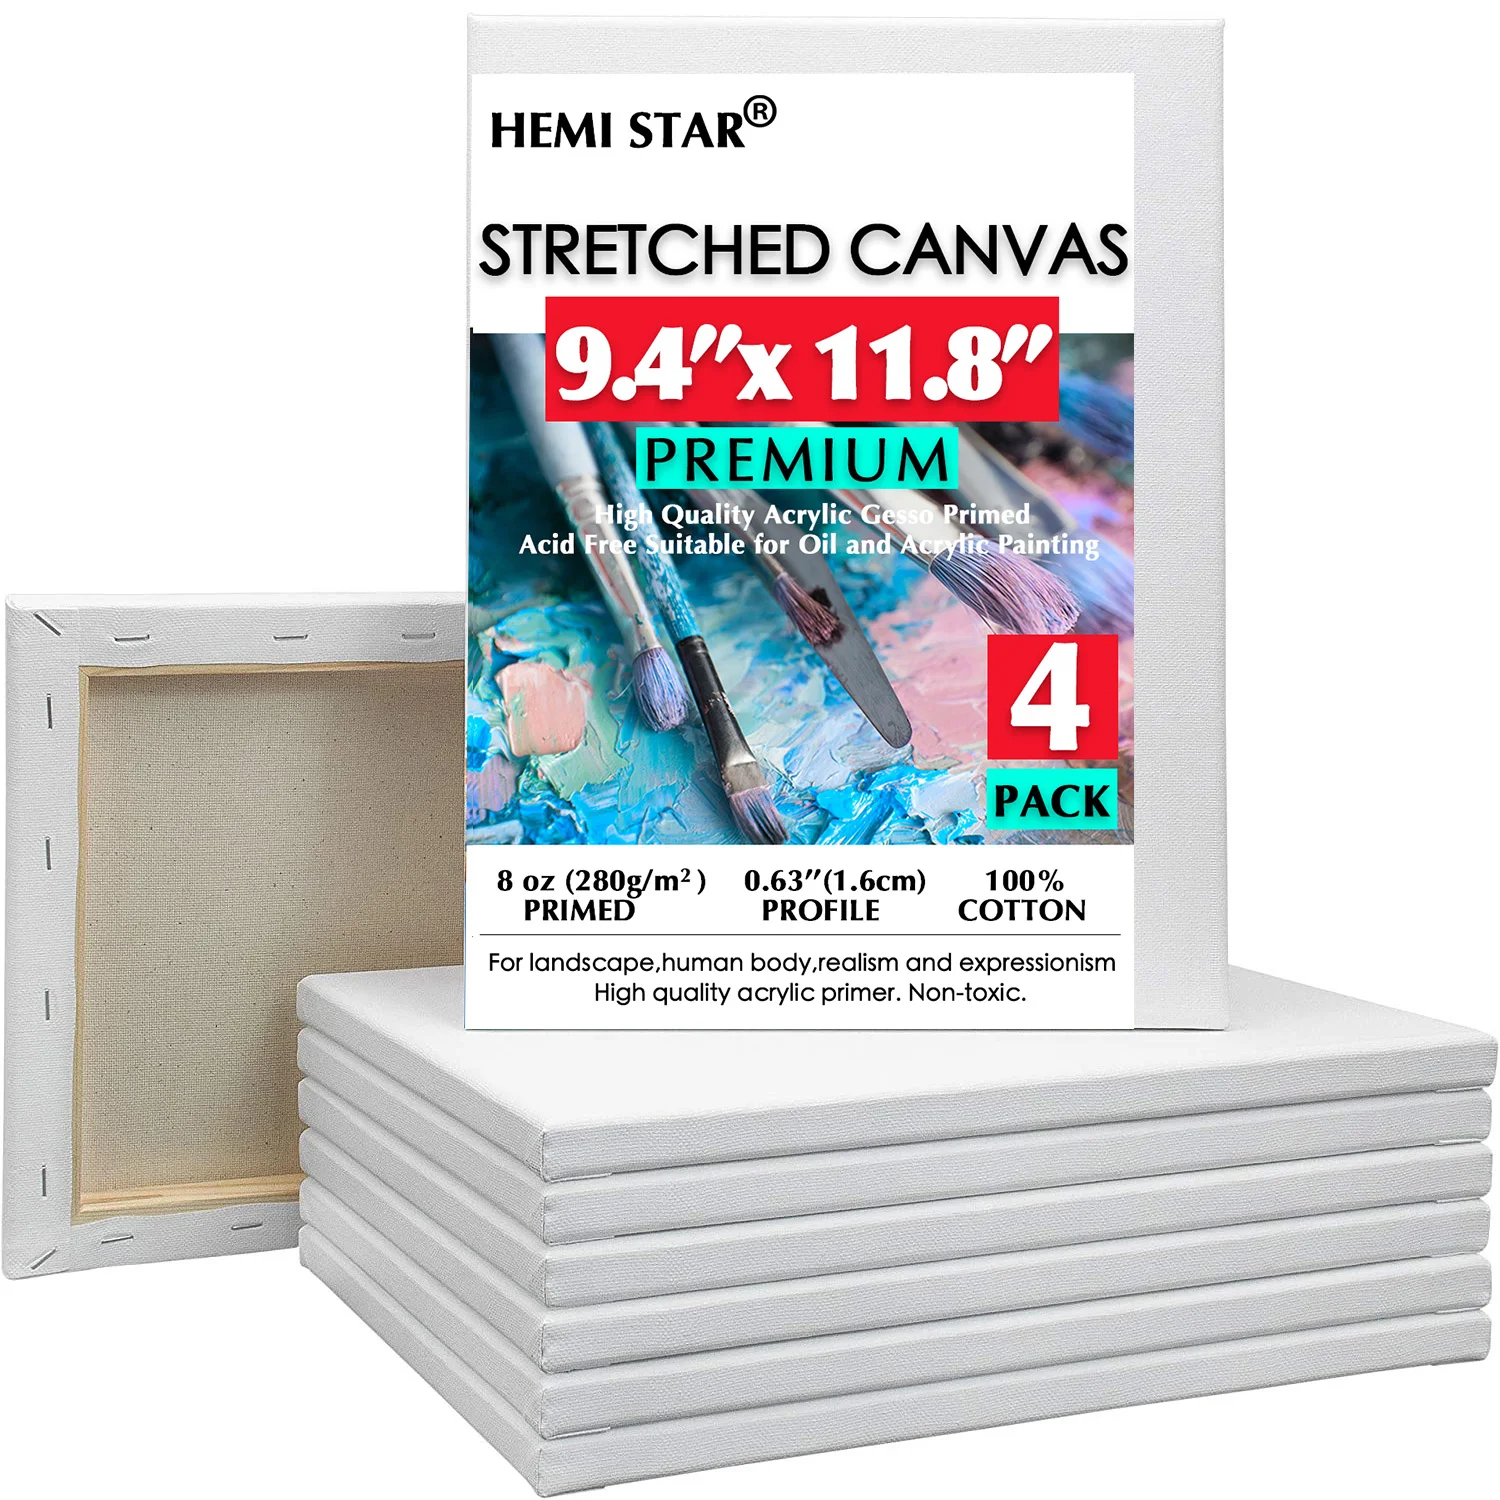 

4 Pack Stretched Canvas for Painting 9.4x11.8 inch,24x30cm Primed White 100% Cotton Artist Blank Canvas Board 8 oz Gesso-Primed